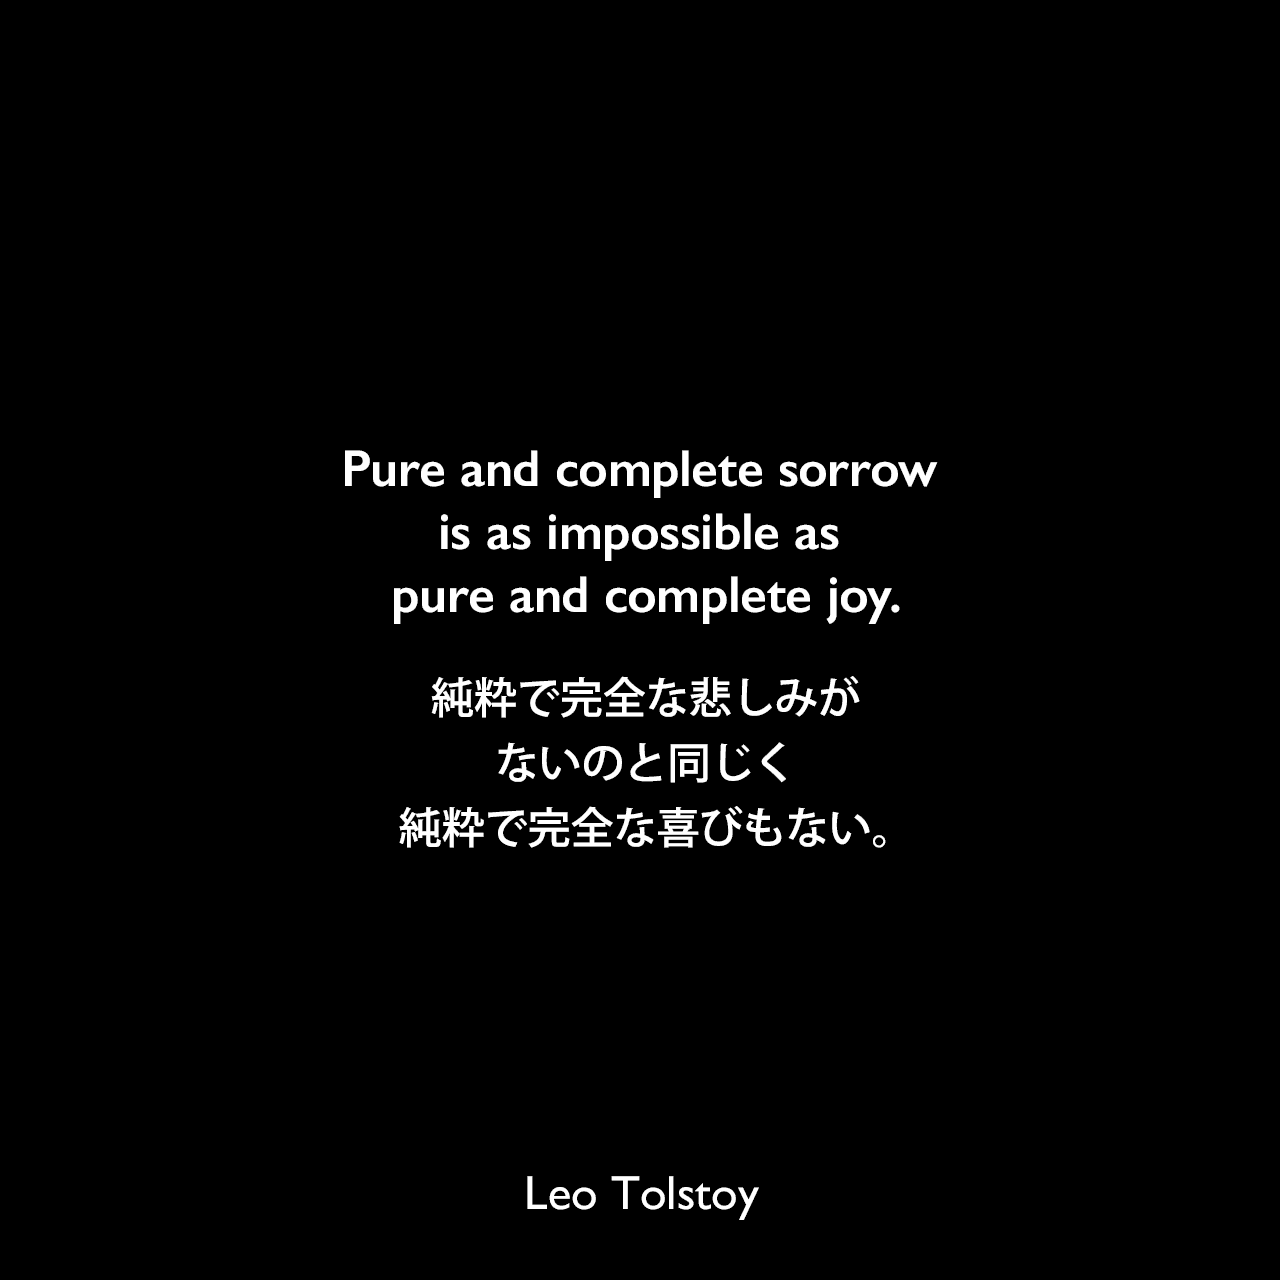 Pure and complete sorrow is as impossible as pure and complete joy.純粋で完全な悲しみがないのと同じく、純粋で完全な喜びもない。- トルストイによる小説「戦争と平和」よりLeo Tolstoy